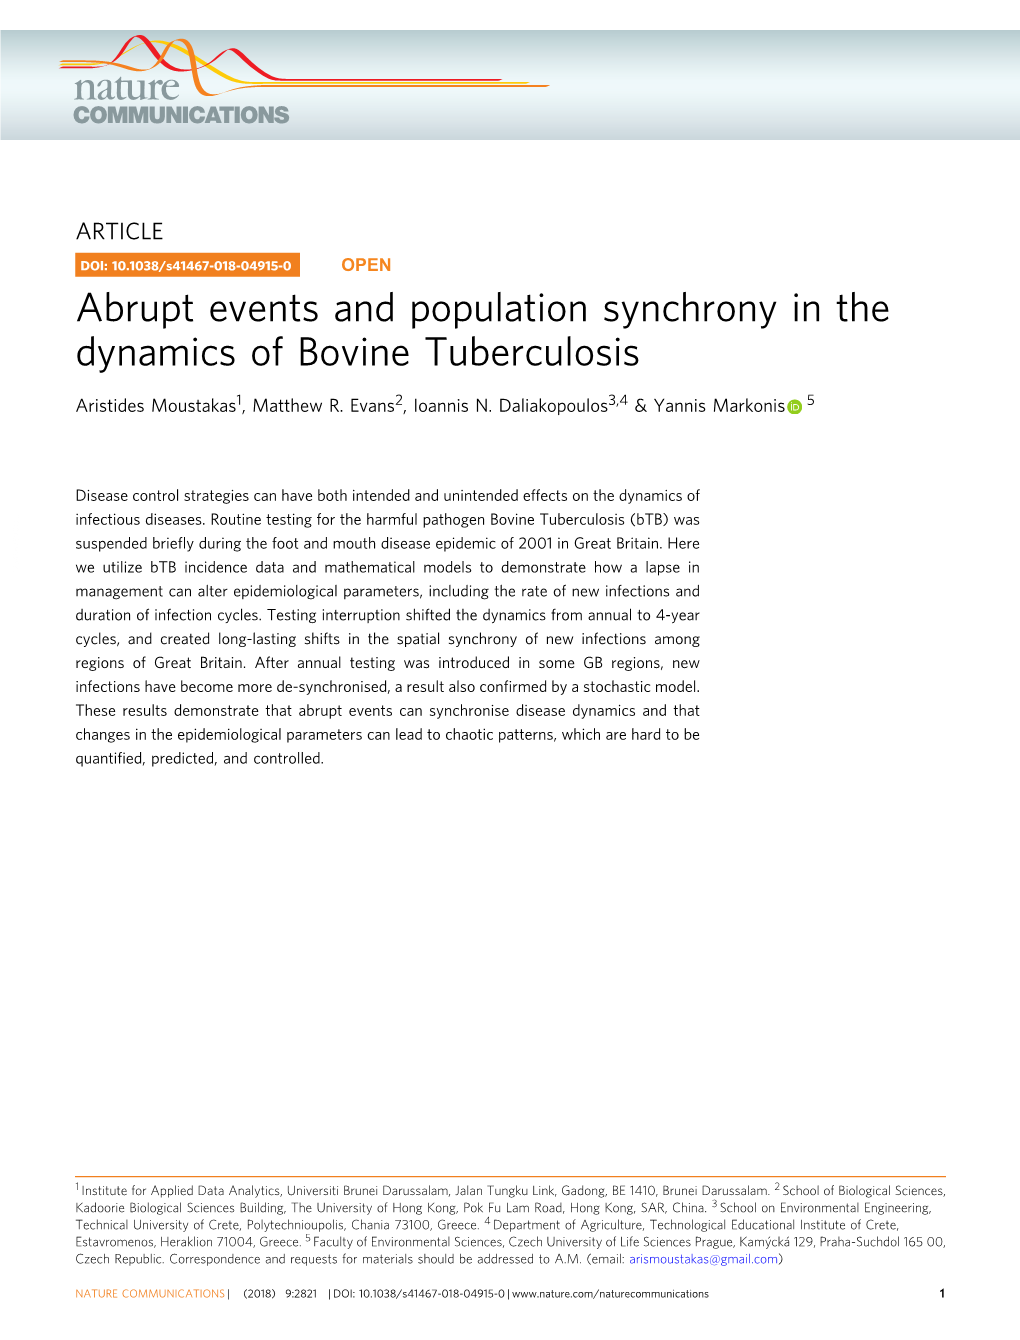 Abrupt Events and Population Synchrony in the Dynamics of Bovine Tuberculosis